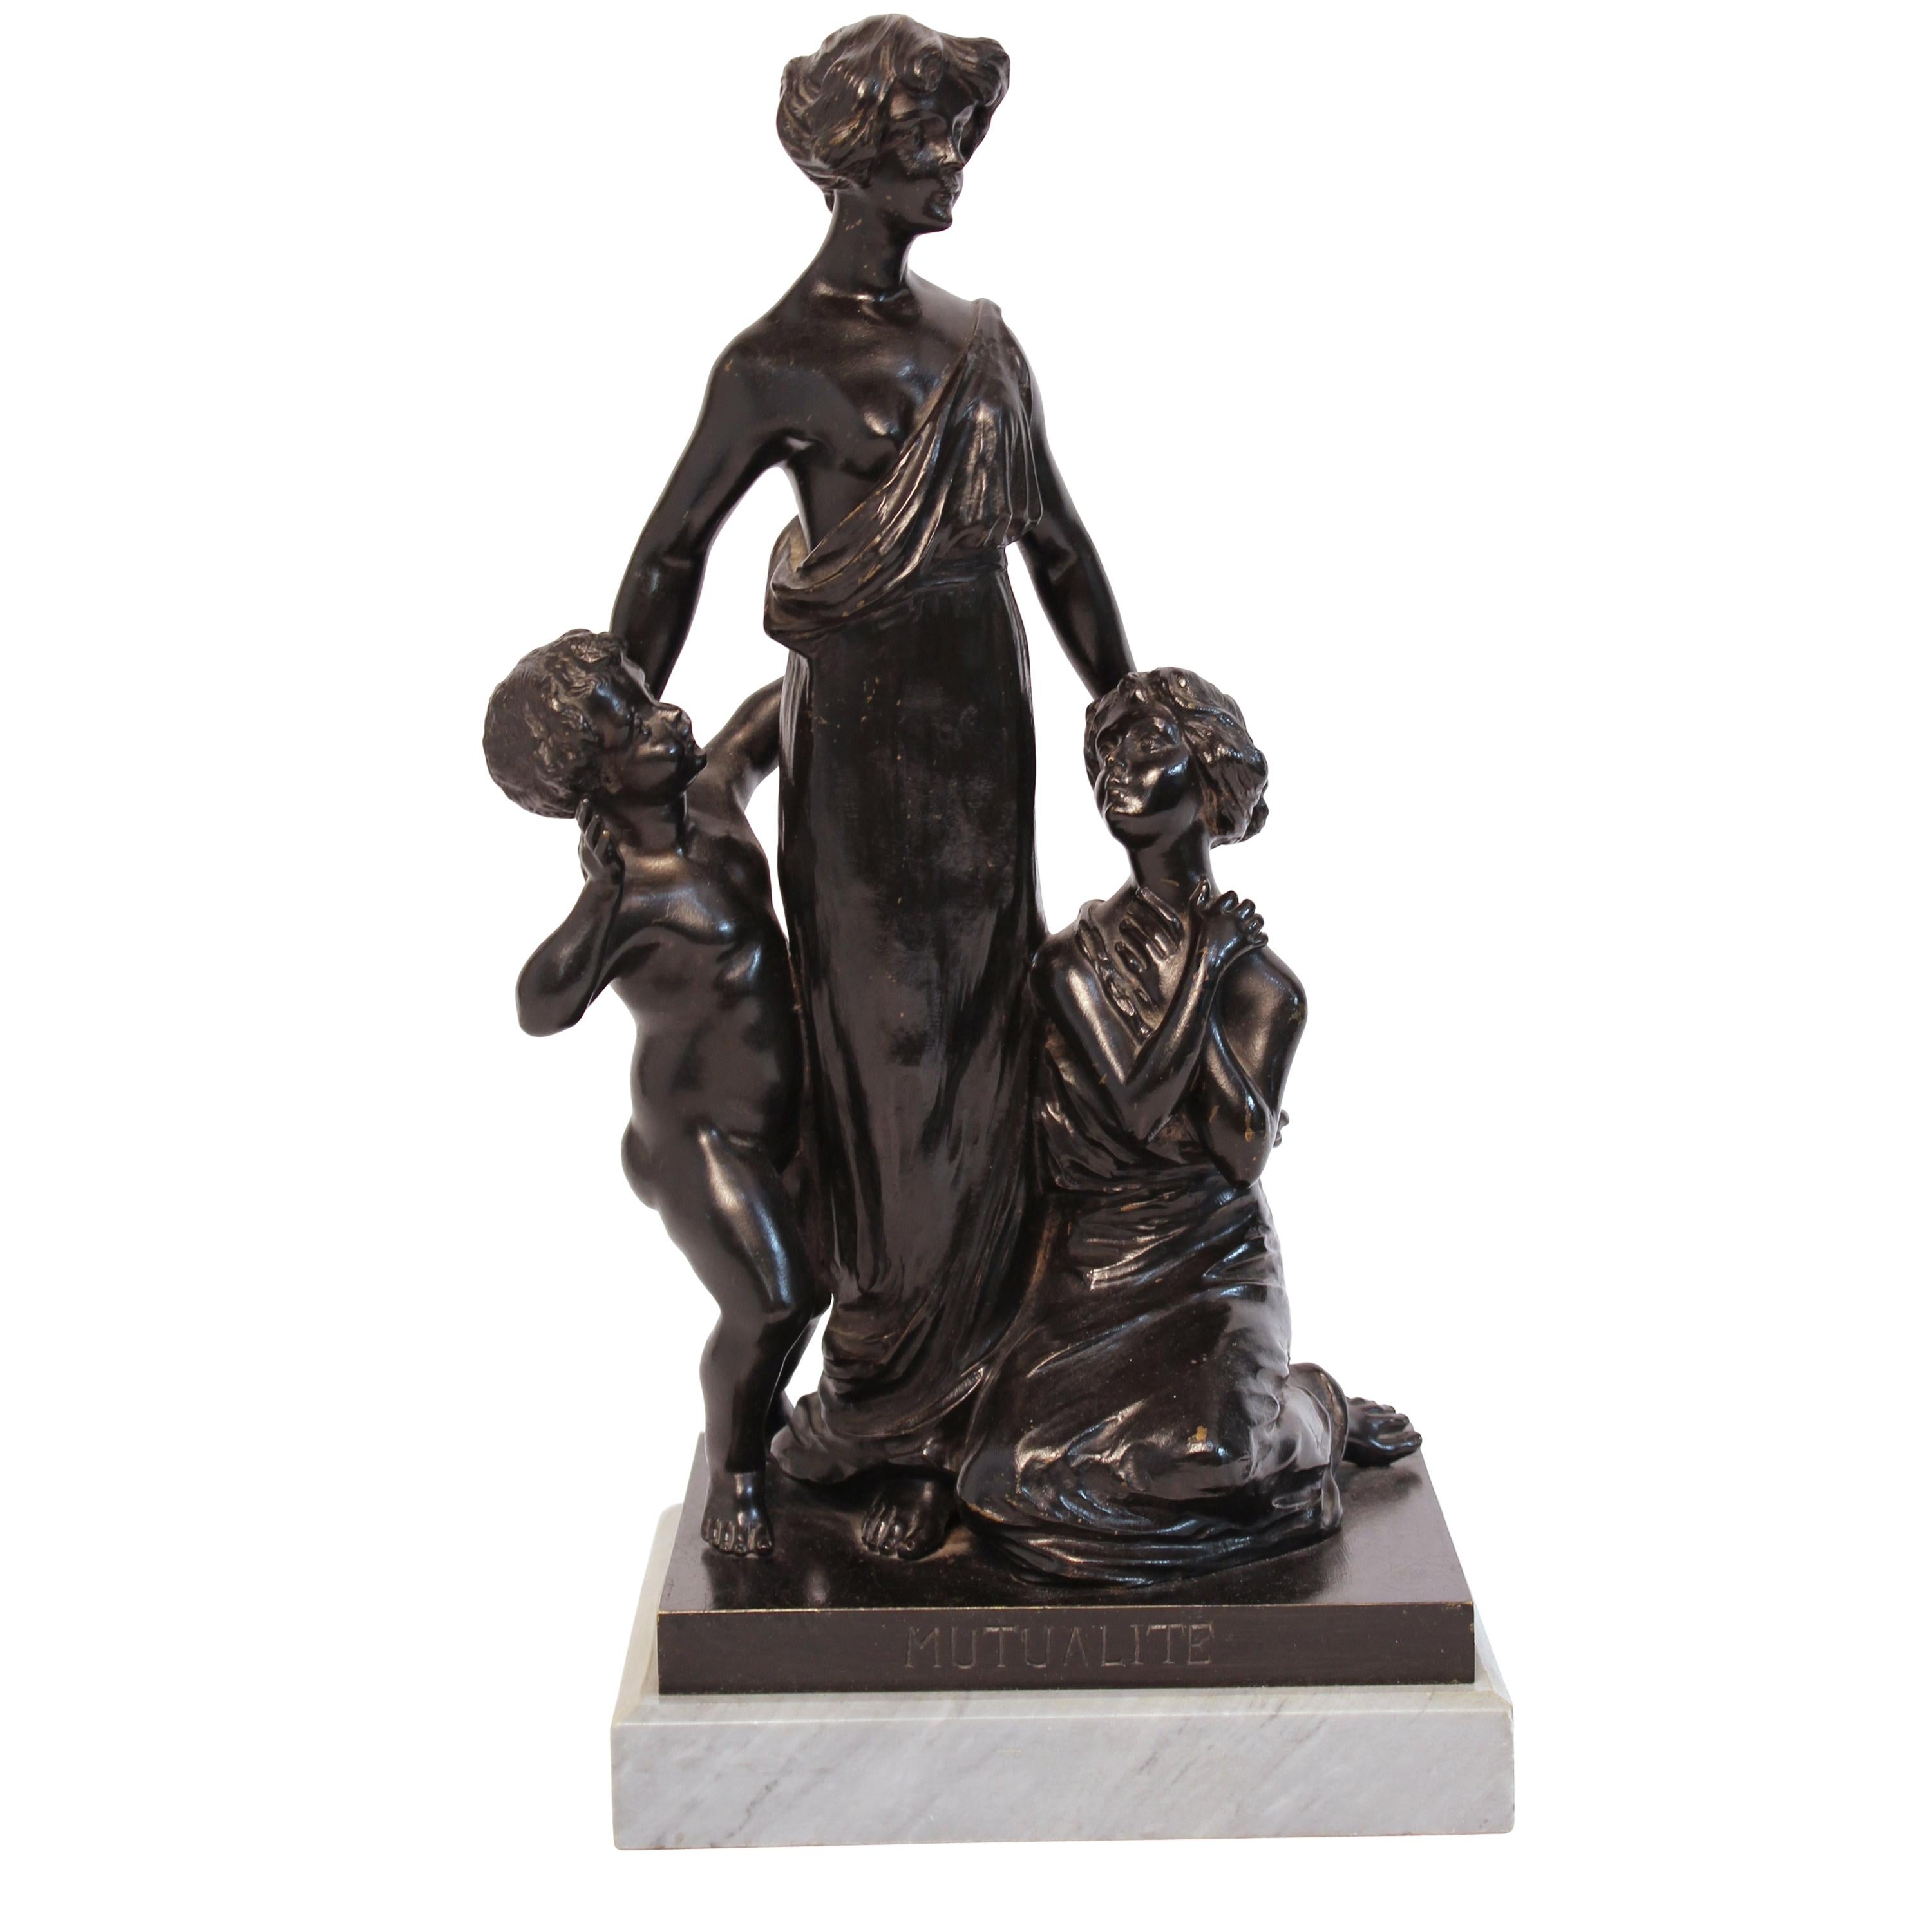 Georges Flamand Art Nouveau Bronze Sculpture "Mutualite" on Marble Base